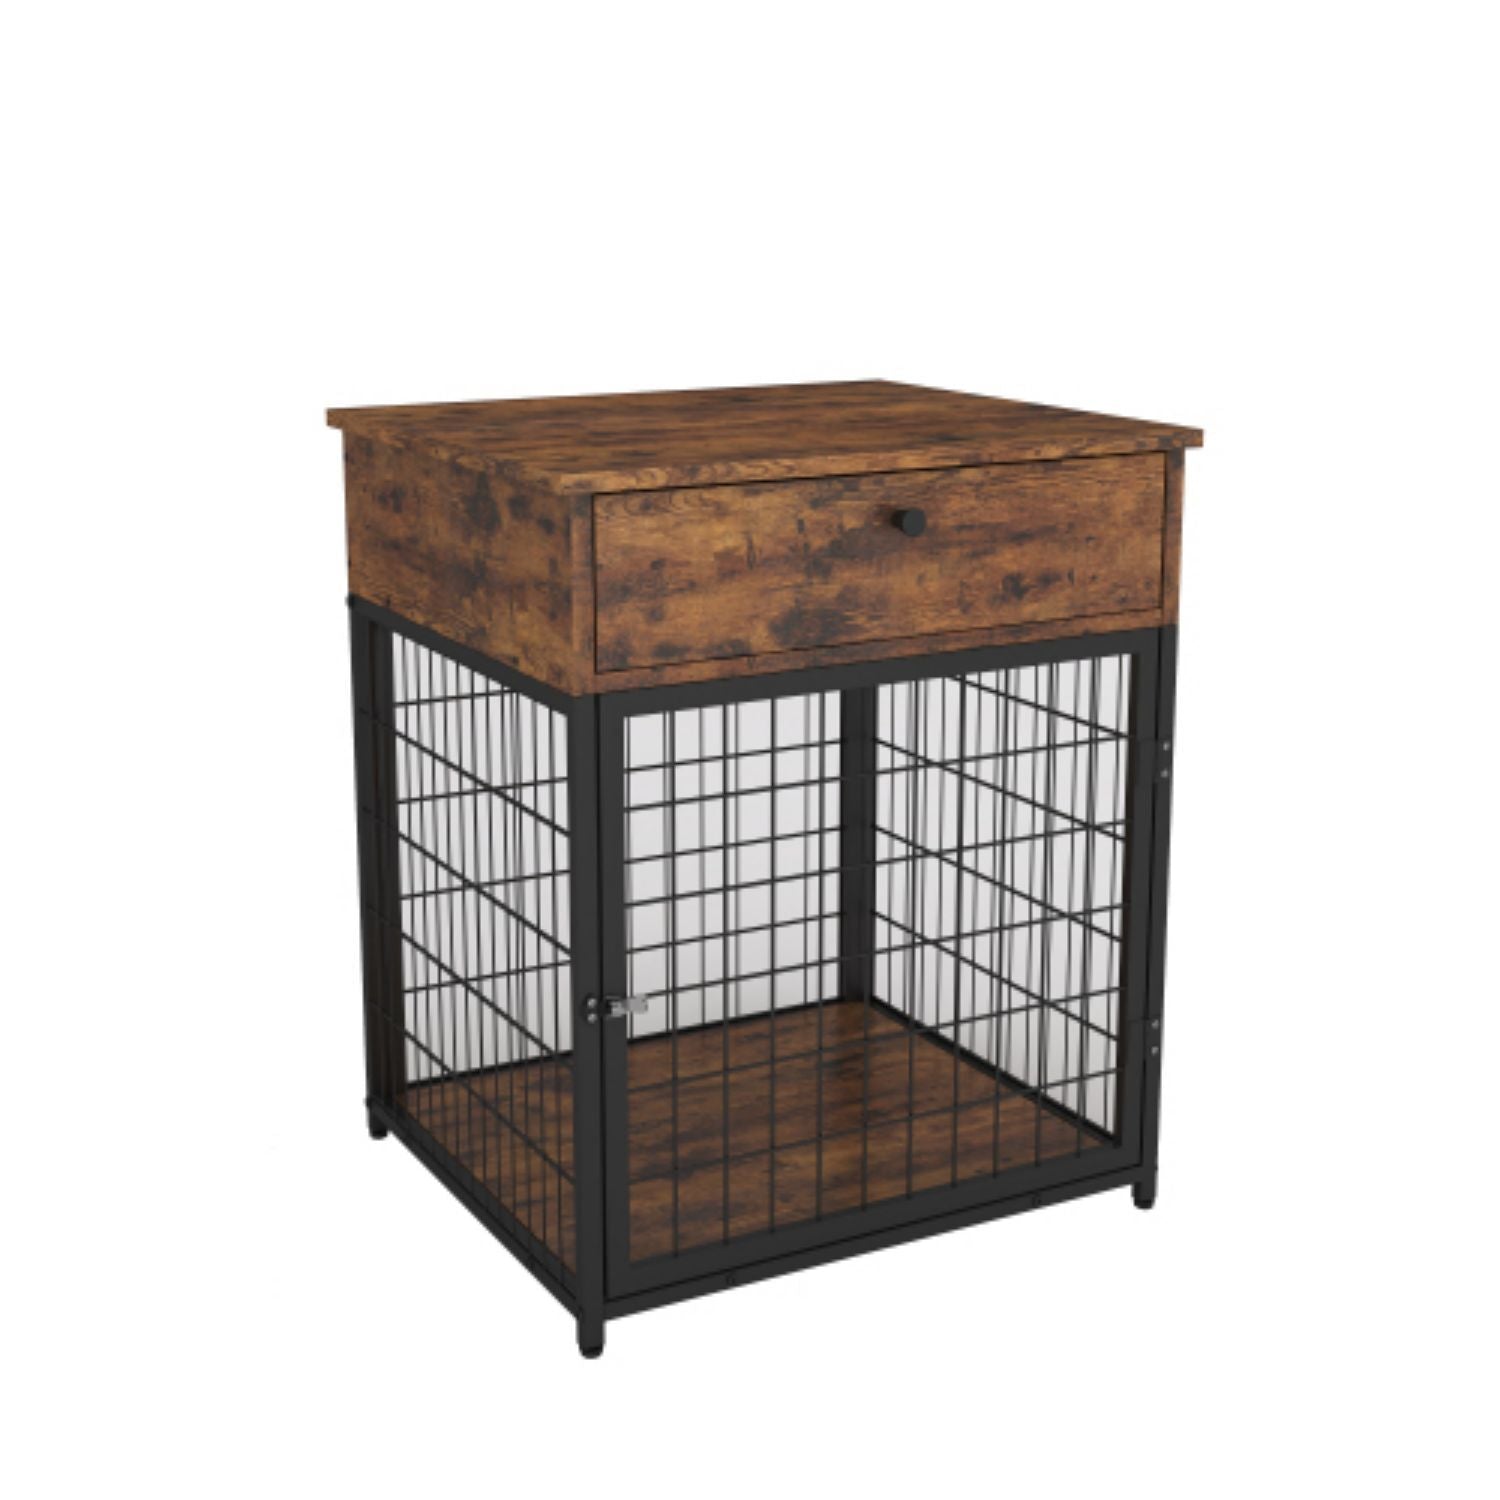 Cmgb Dog Crates for small dogs Wooden Dog Rustic Brown